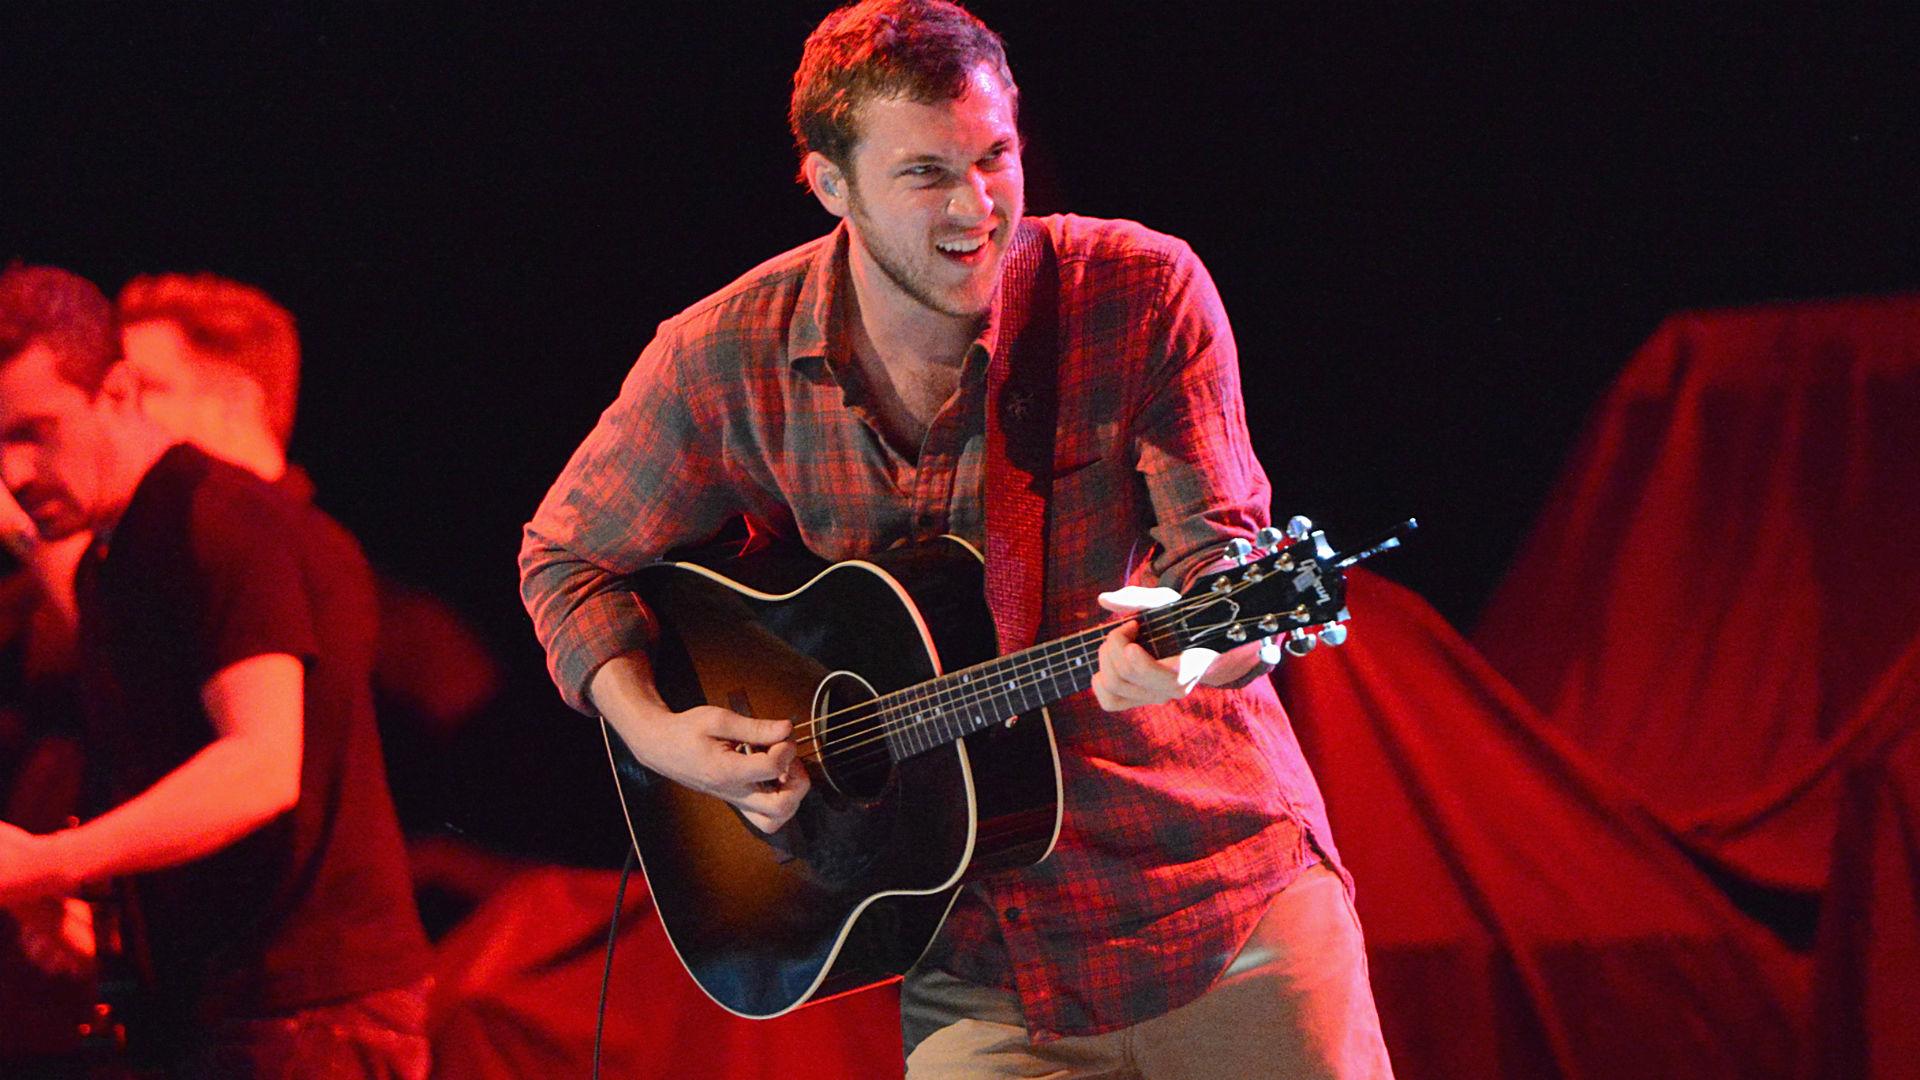 American Idol winner Phillip Phillips to sing national anthem at